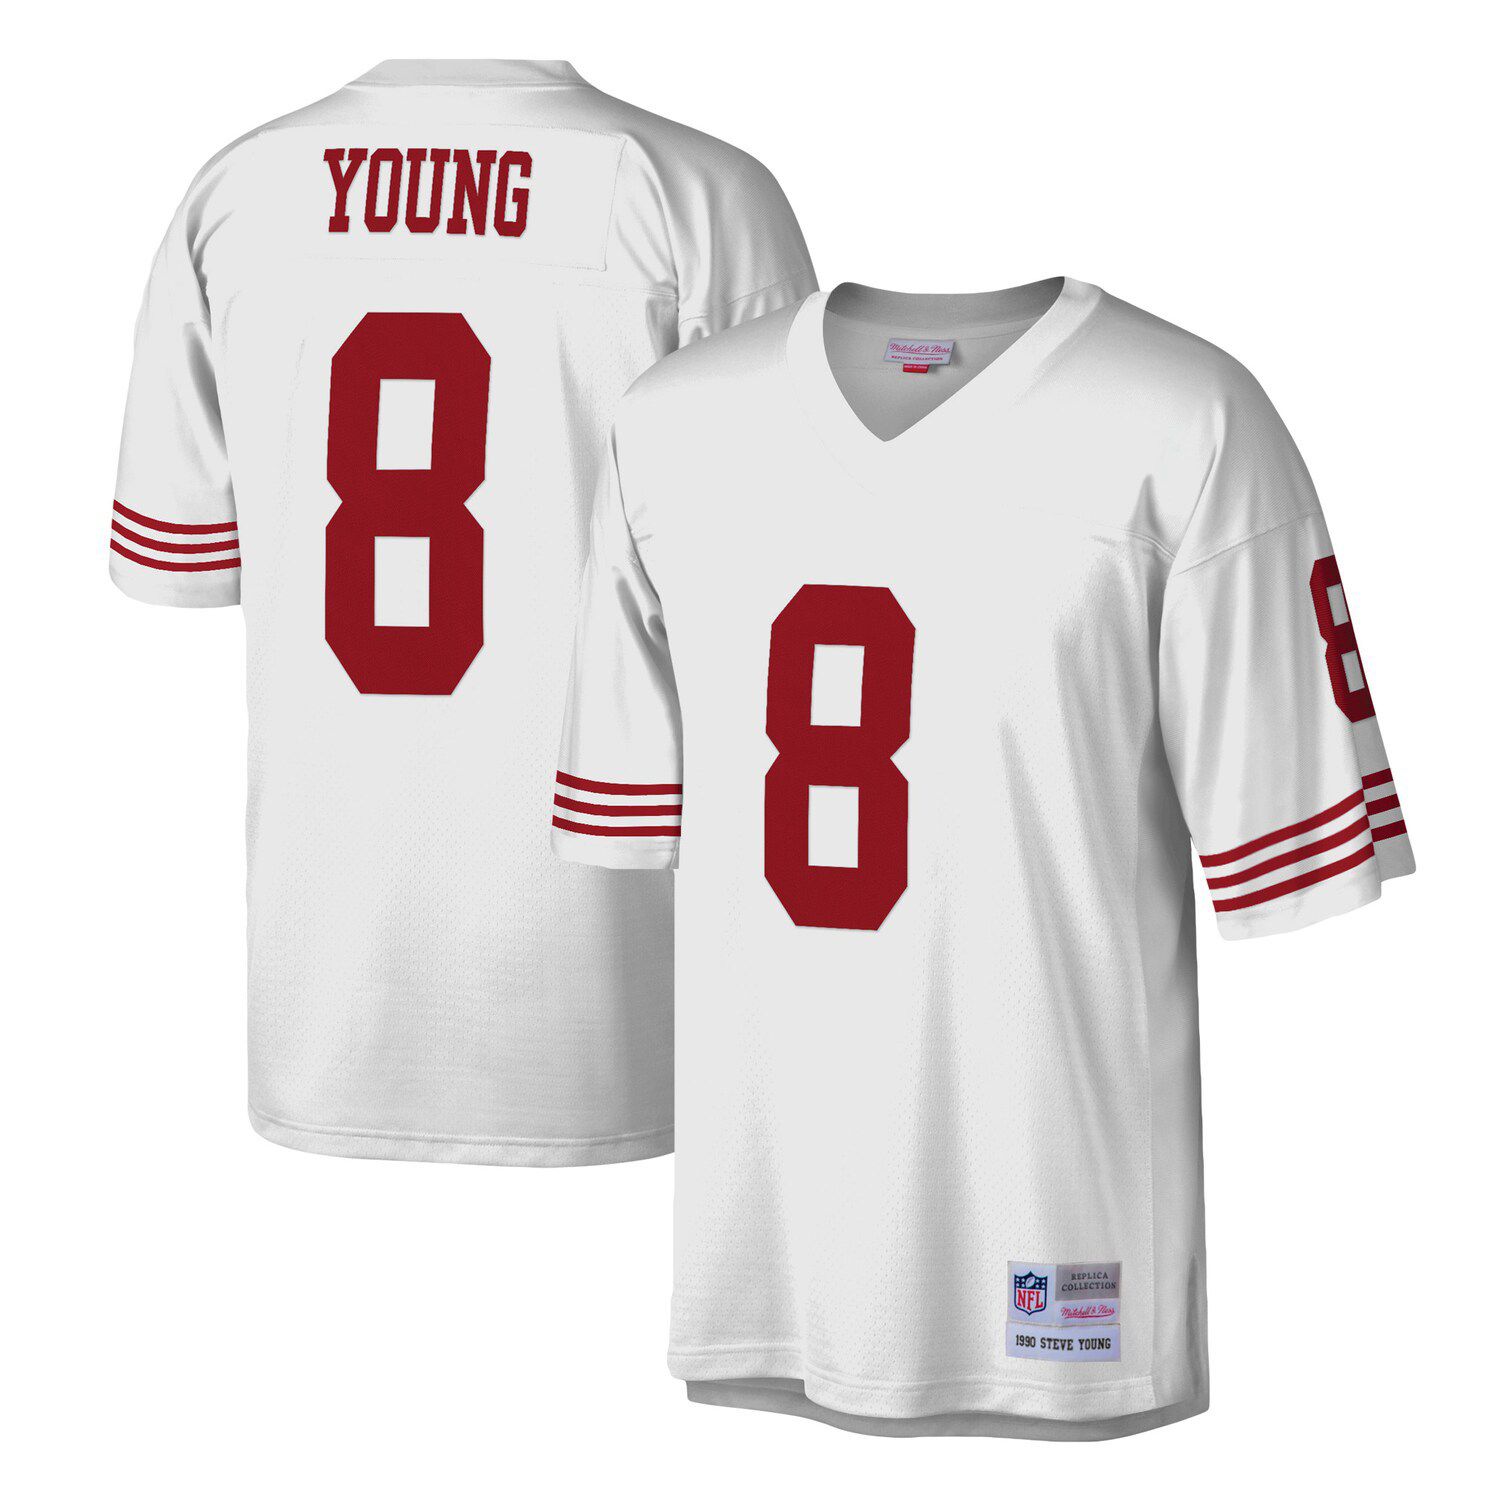 steve young jersey signed